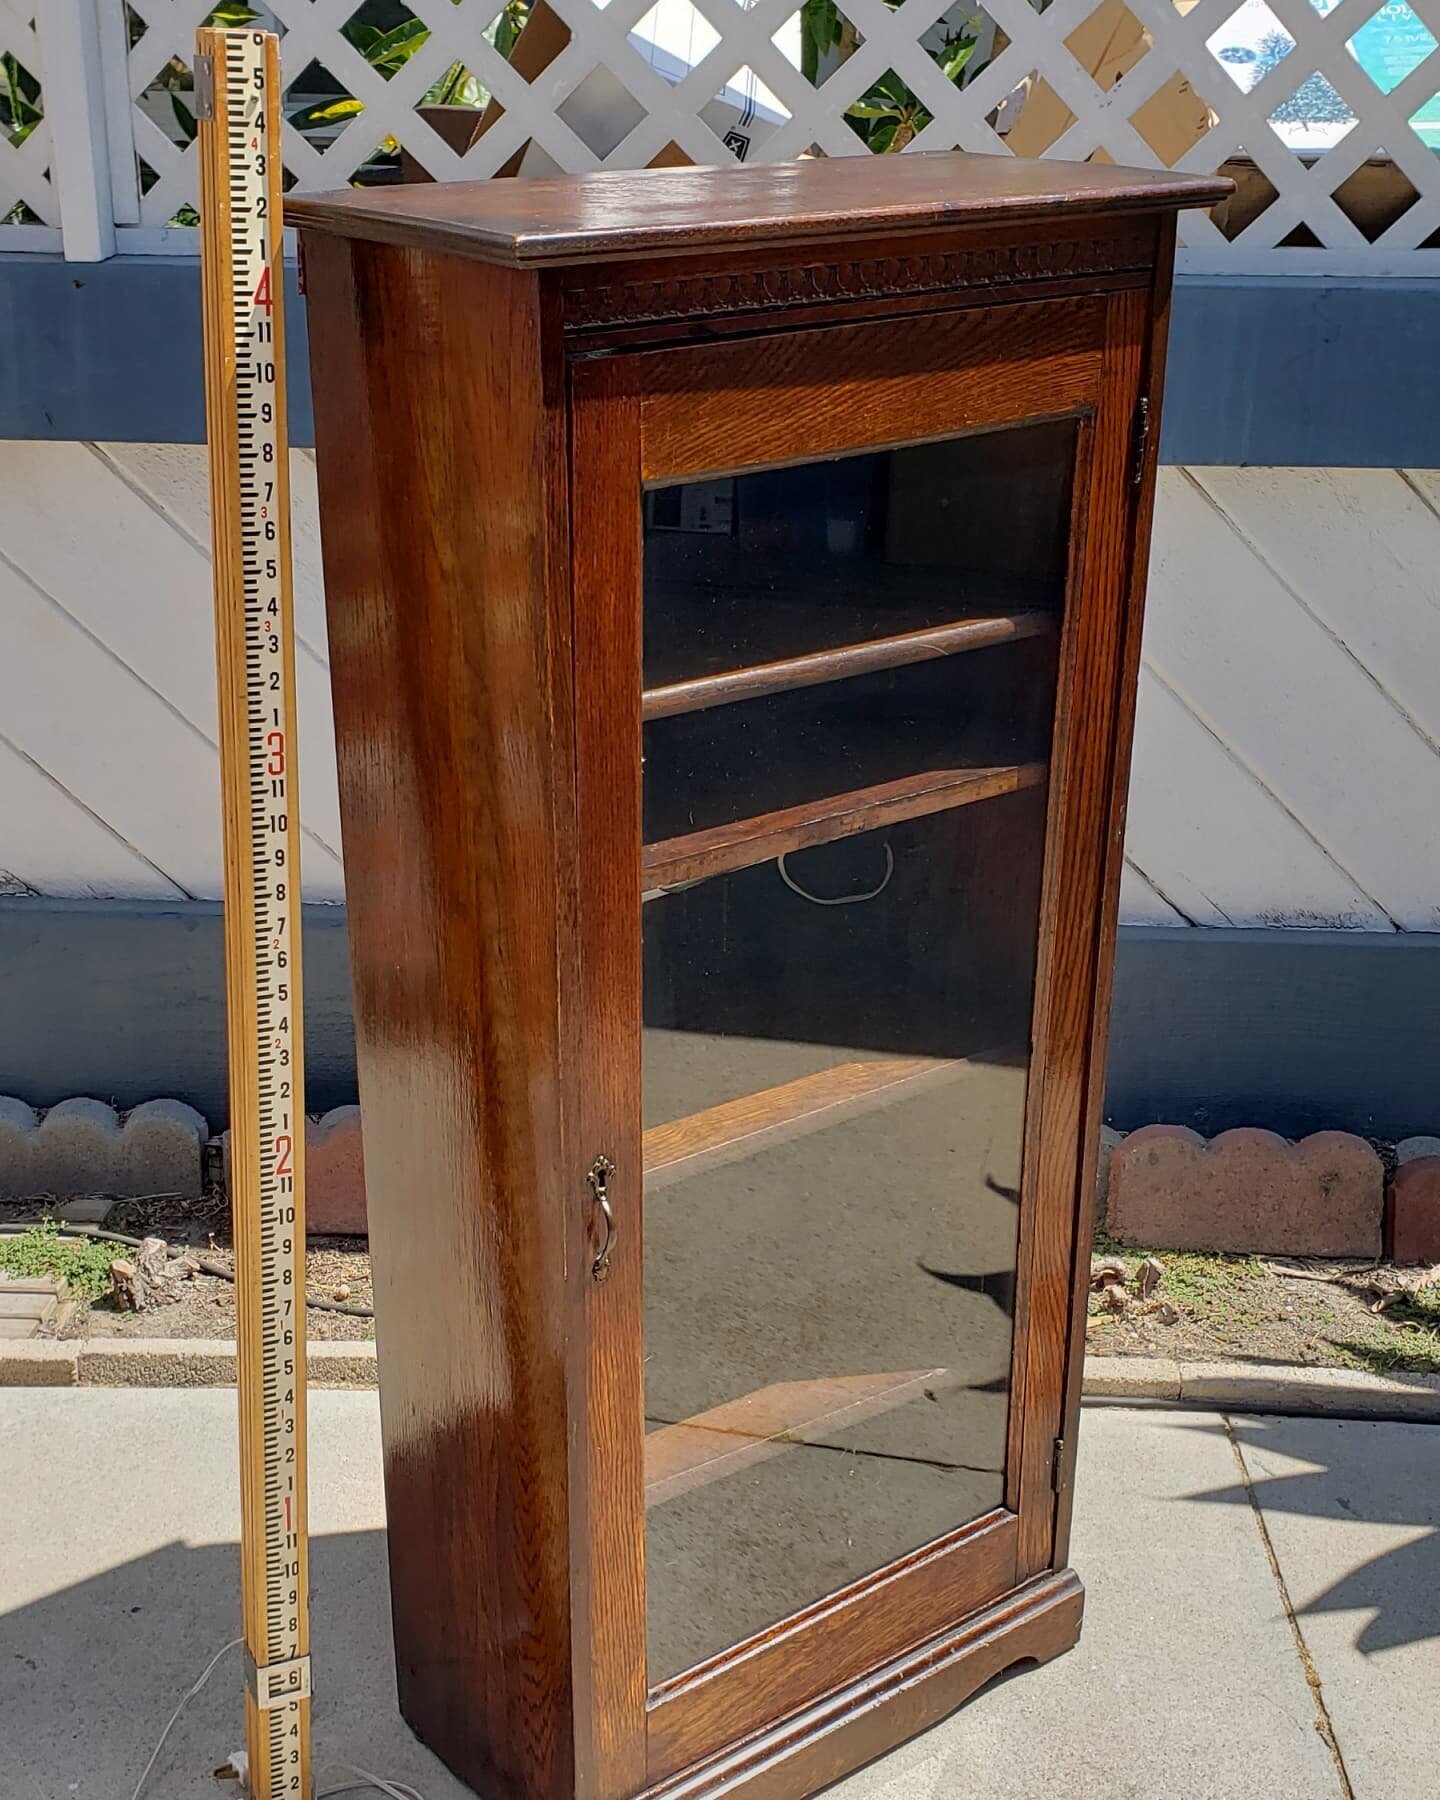 $185. Antique display cabinet curio 5 shelf unit with lights added. Late 1800s era furniture. 
50&quot; tall 24&quot; wide 12&quot; deep. 
Plus tax.
This item is located in my Antique Mall booth in the city or Orange. Text Message (don't call) for ad